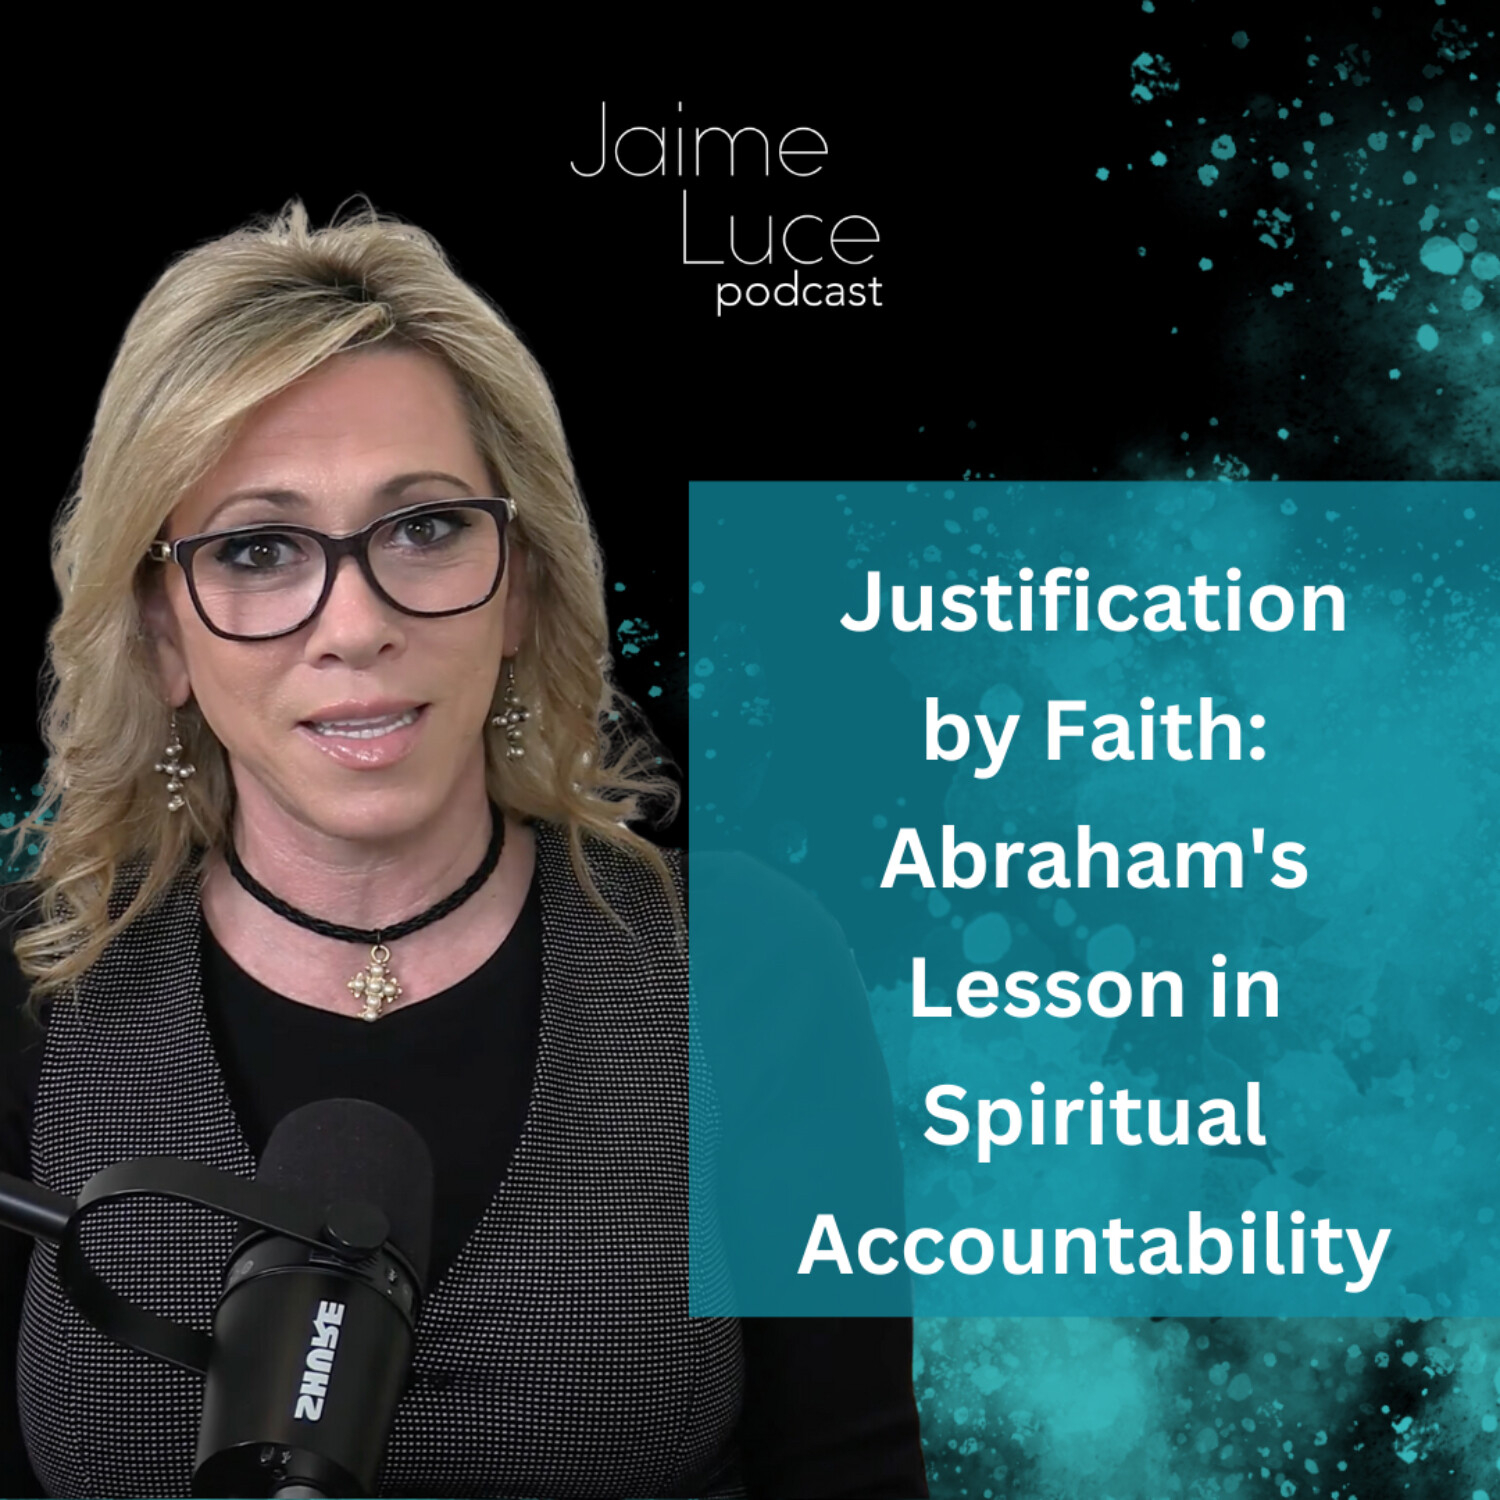 Justification by Faith: Abraham's Lesson in Spiritual Accountability